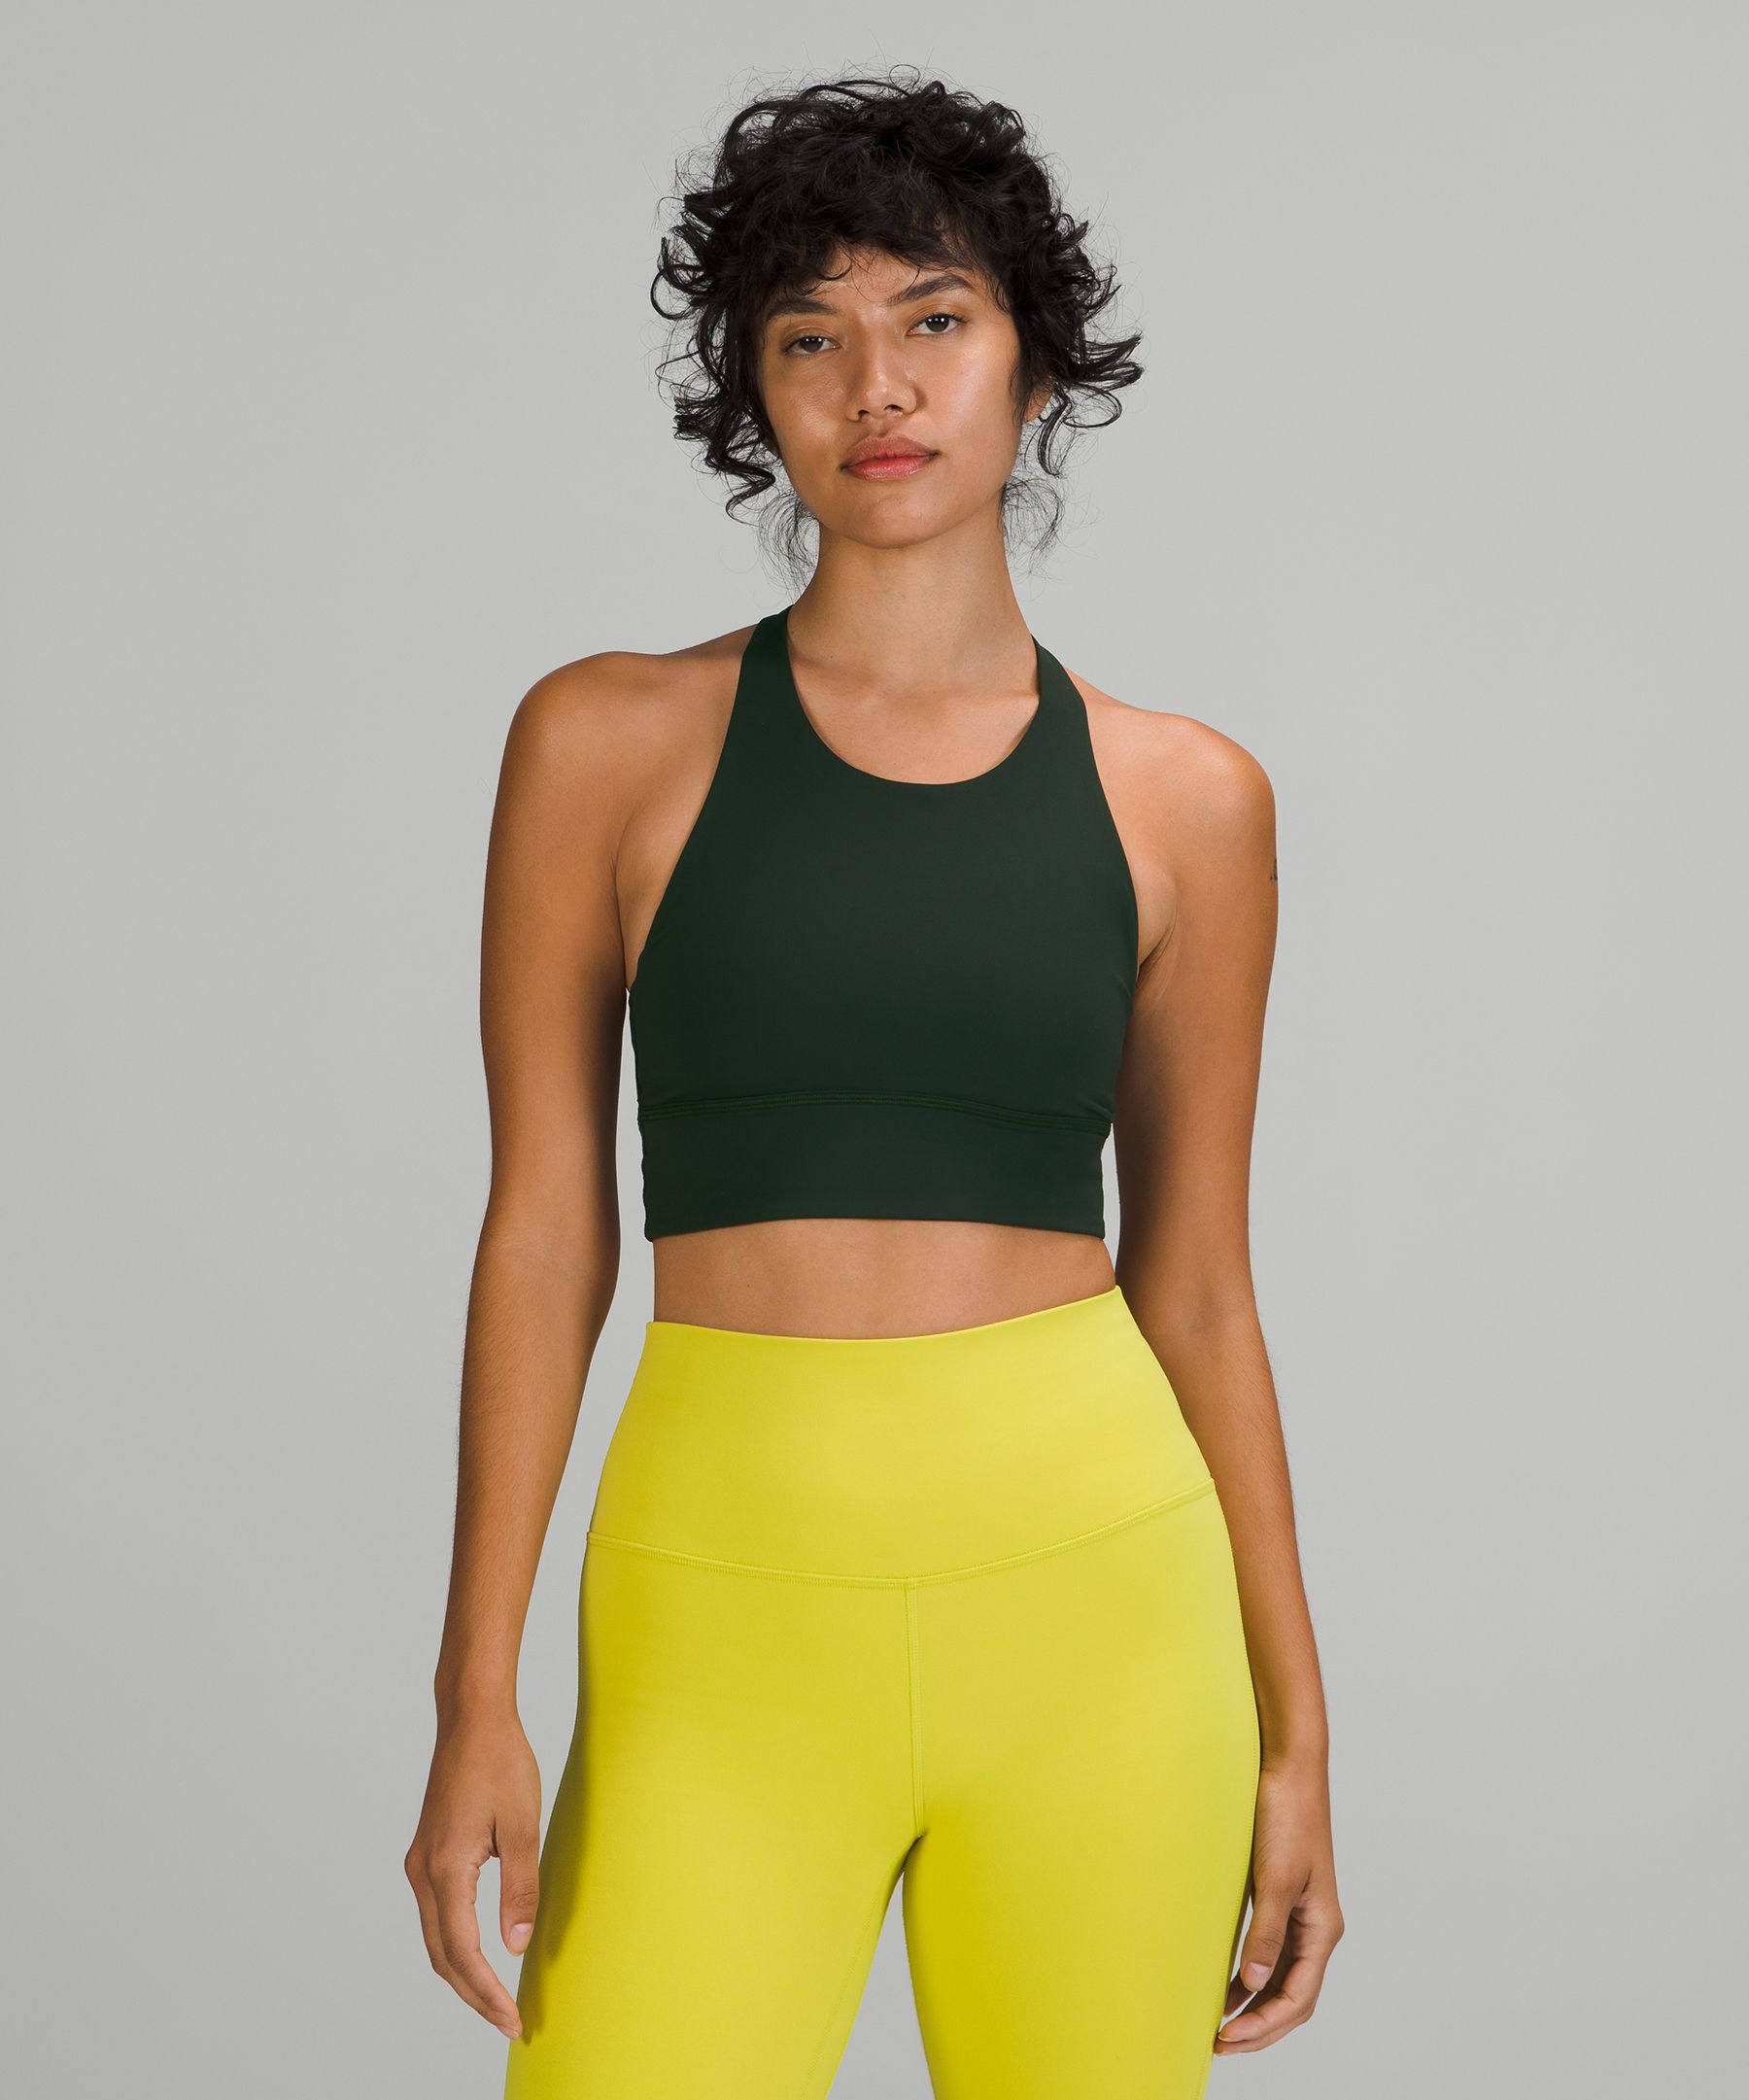 Lululemon - Free to Be High-Neck Longline Bra - Wild *Light Support, A/B Cup